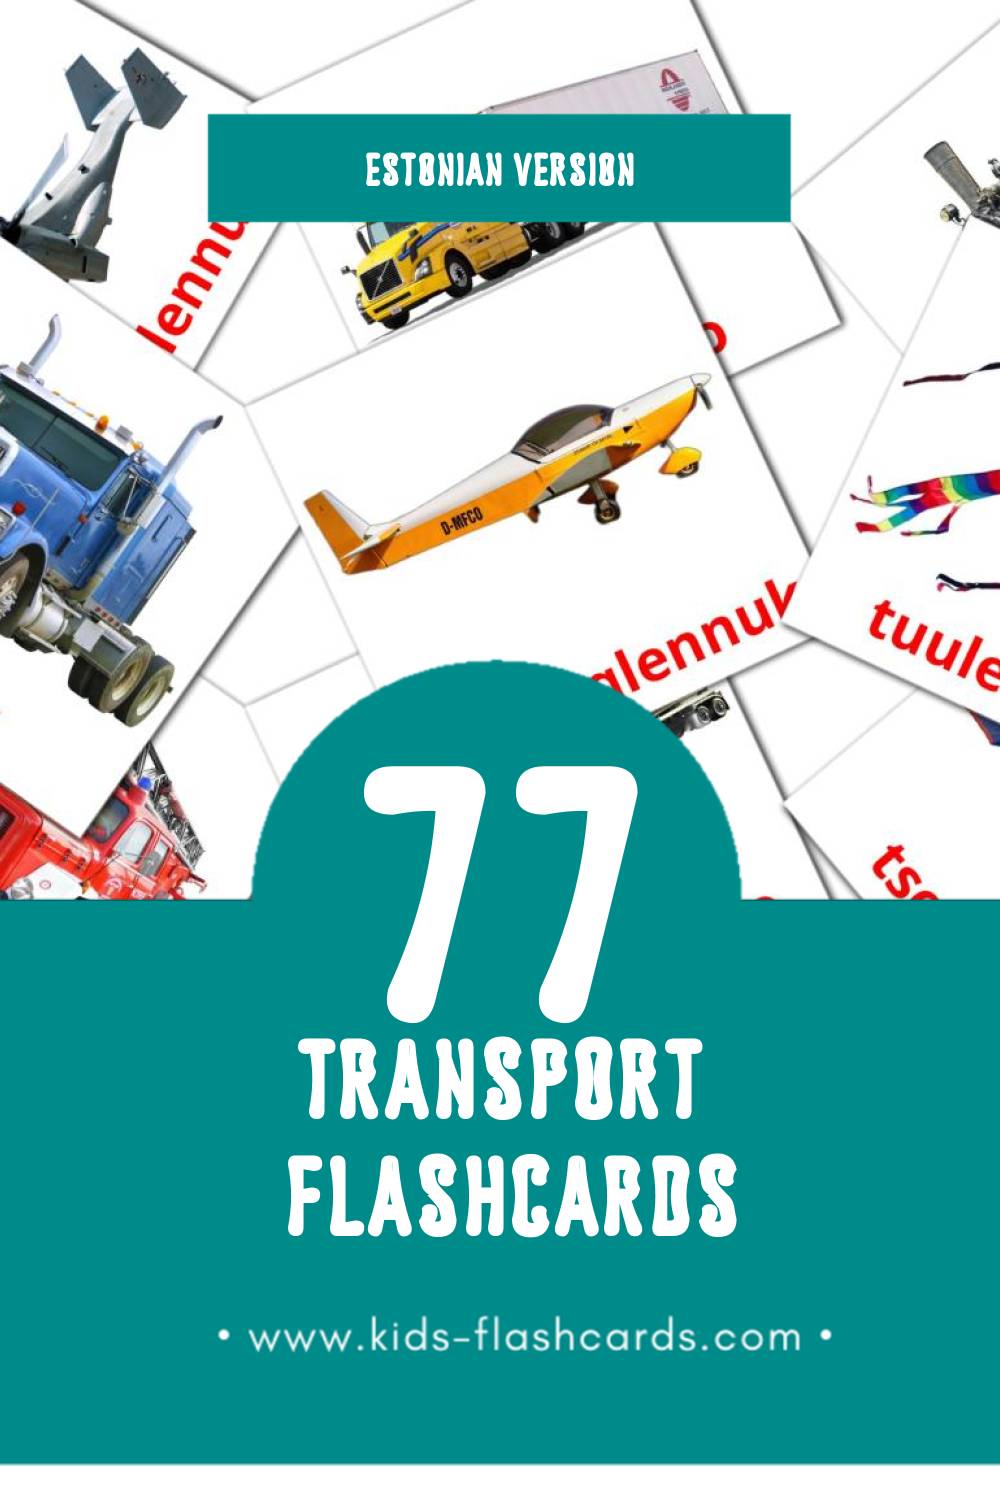 Visual Transport Flashcards for Toddlers (46 cards in Estonian)